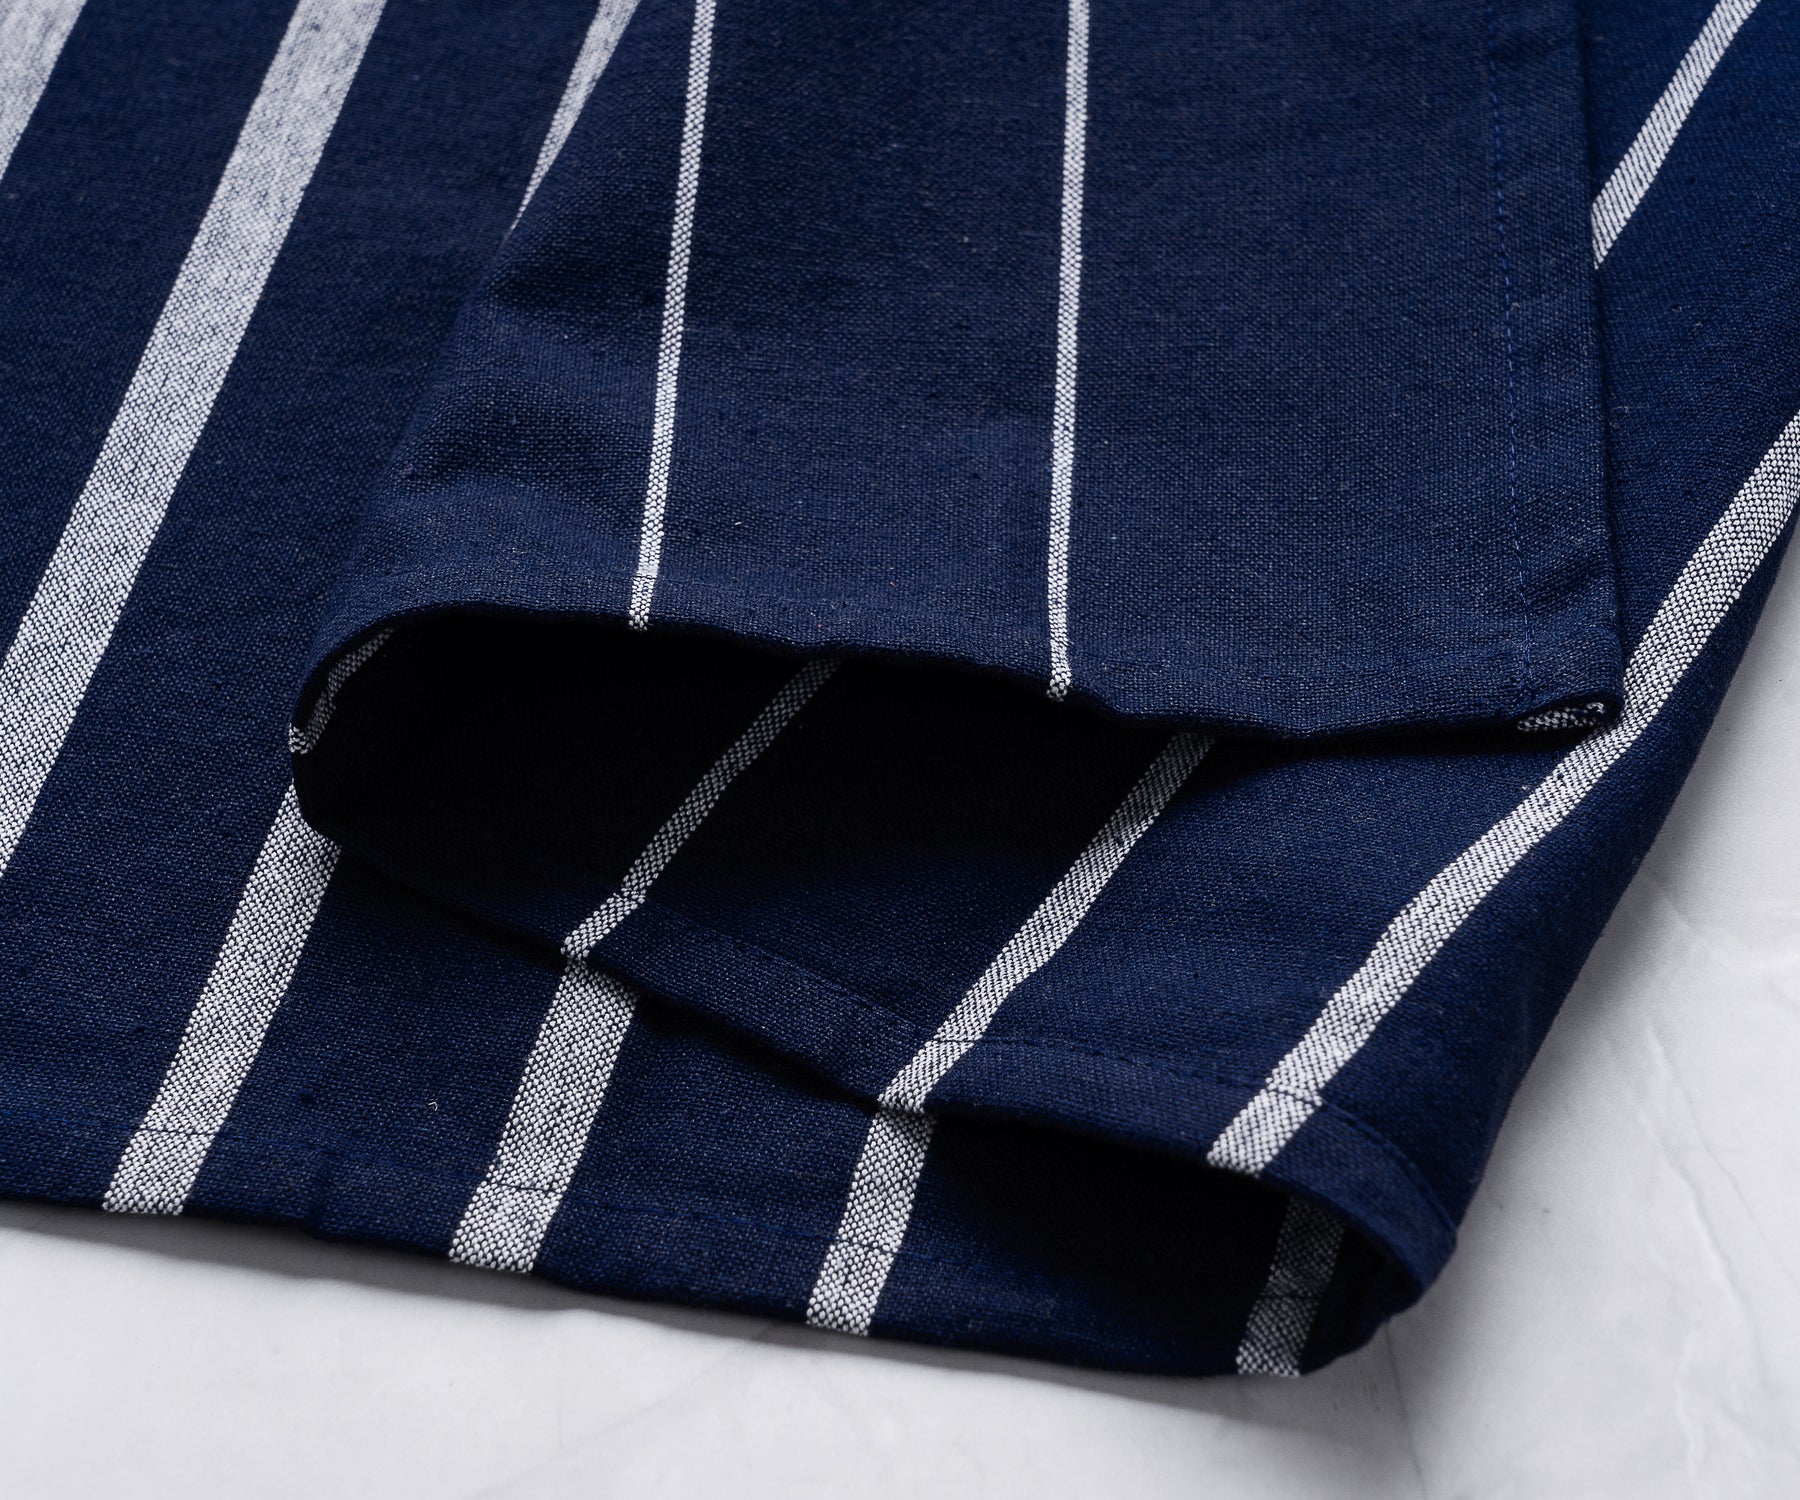 Kitchen cloth towels, durable and absorbent.